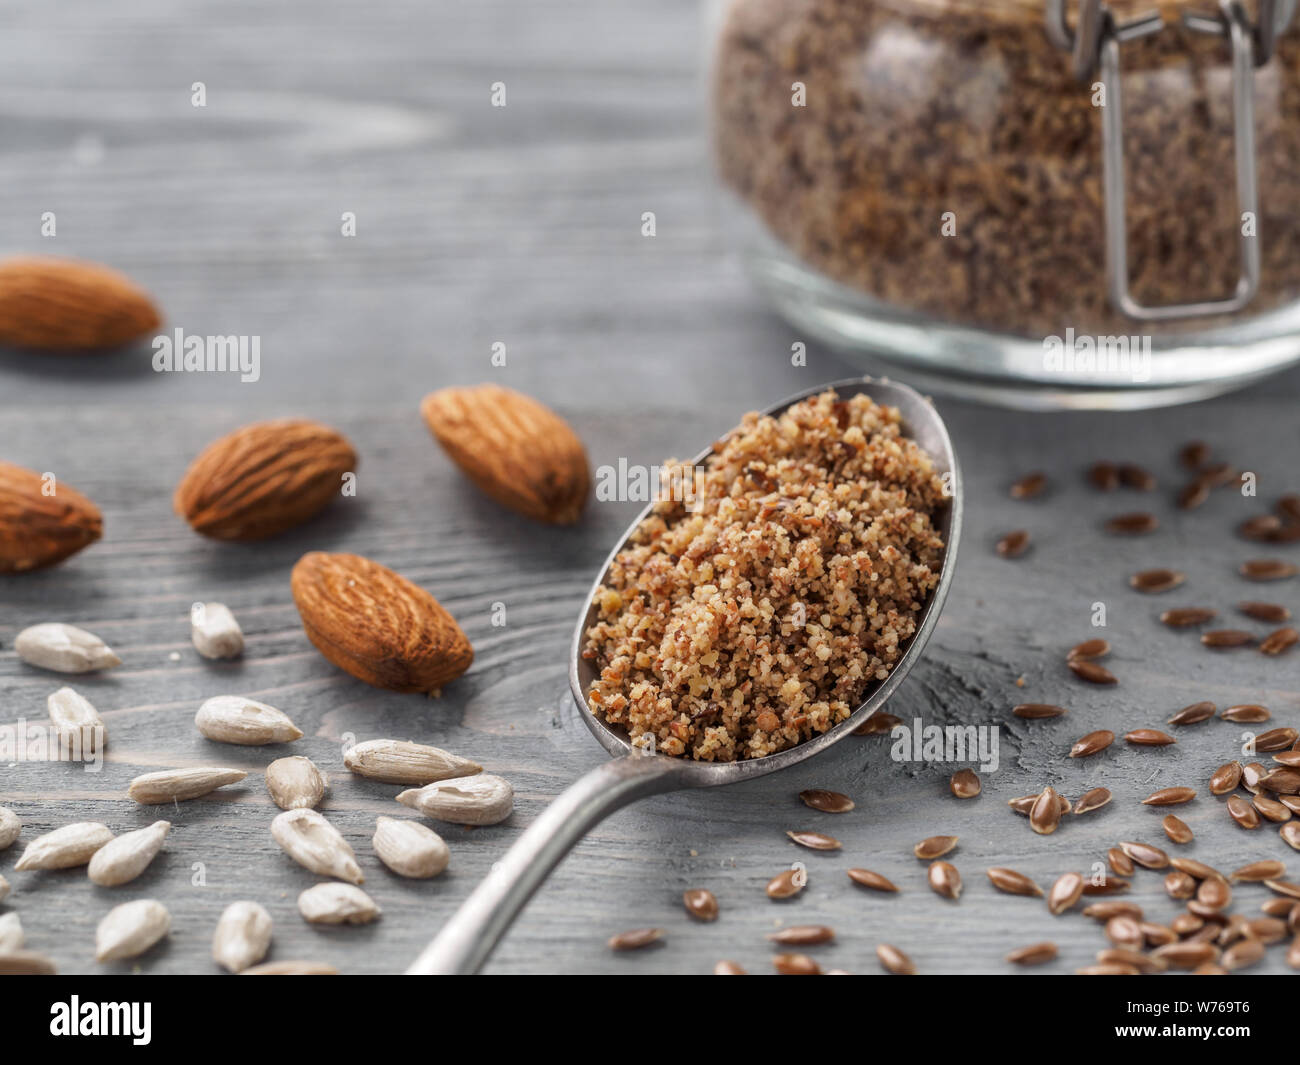 Homemade LSA mix in spoon - Linseed or flax seeds, Sunflower seeds and Almonds. Traditional Australian blend of ground, source of dietary fiber, protein, omega fatty acids. Copy space for text. Stock Photo